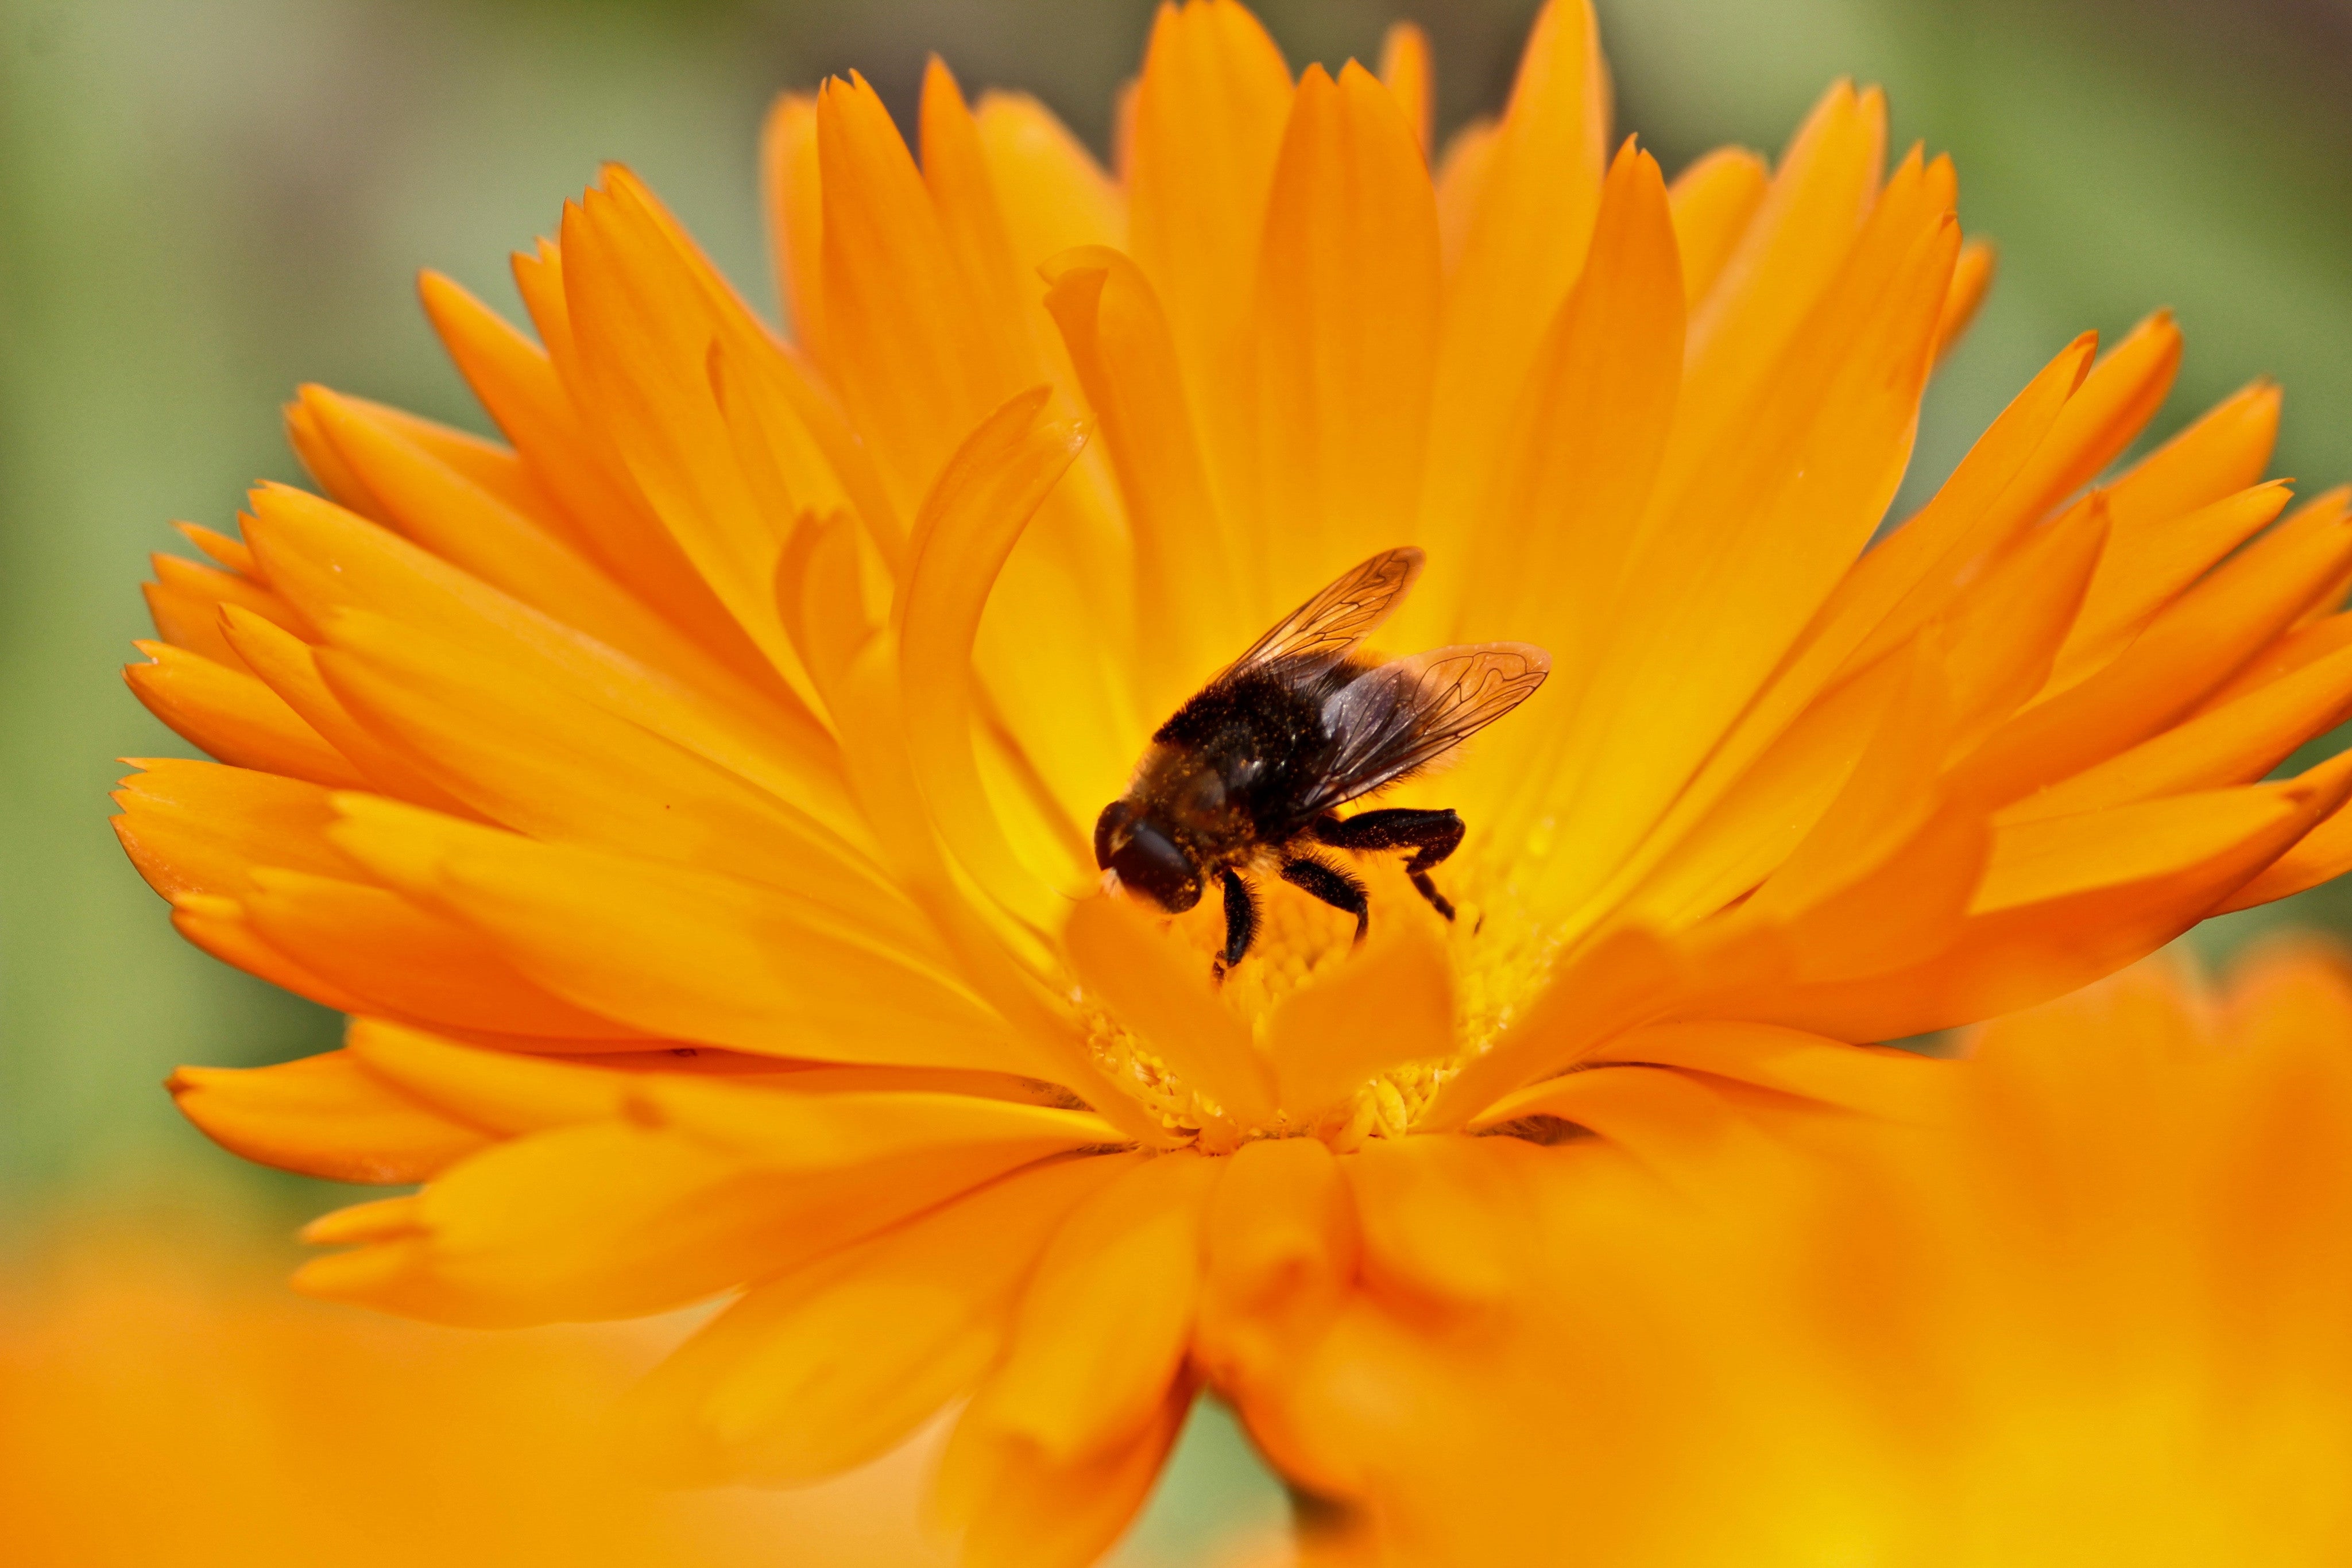 HOW BEES CONTRIBUTE TO THE PLANET